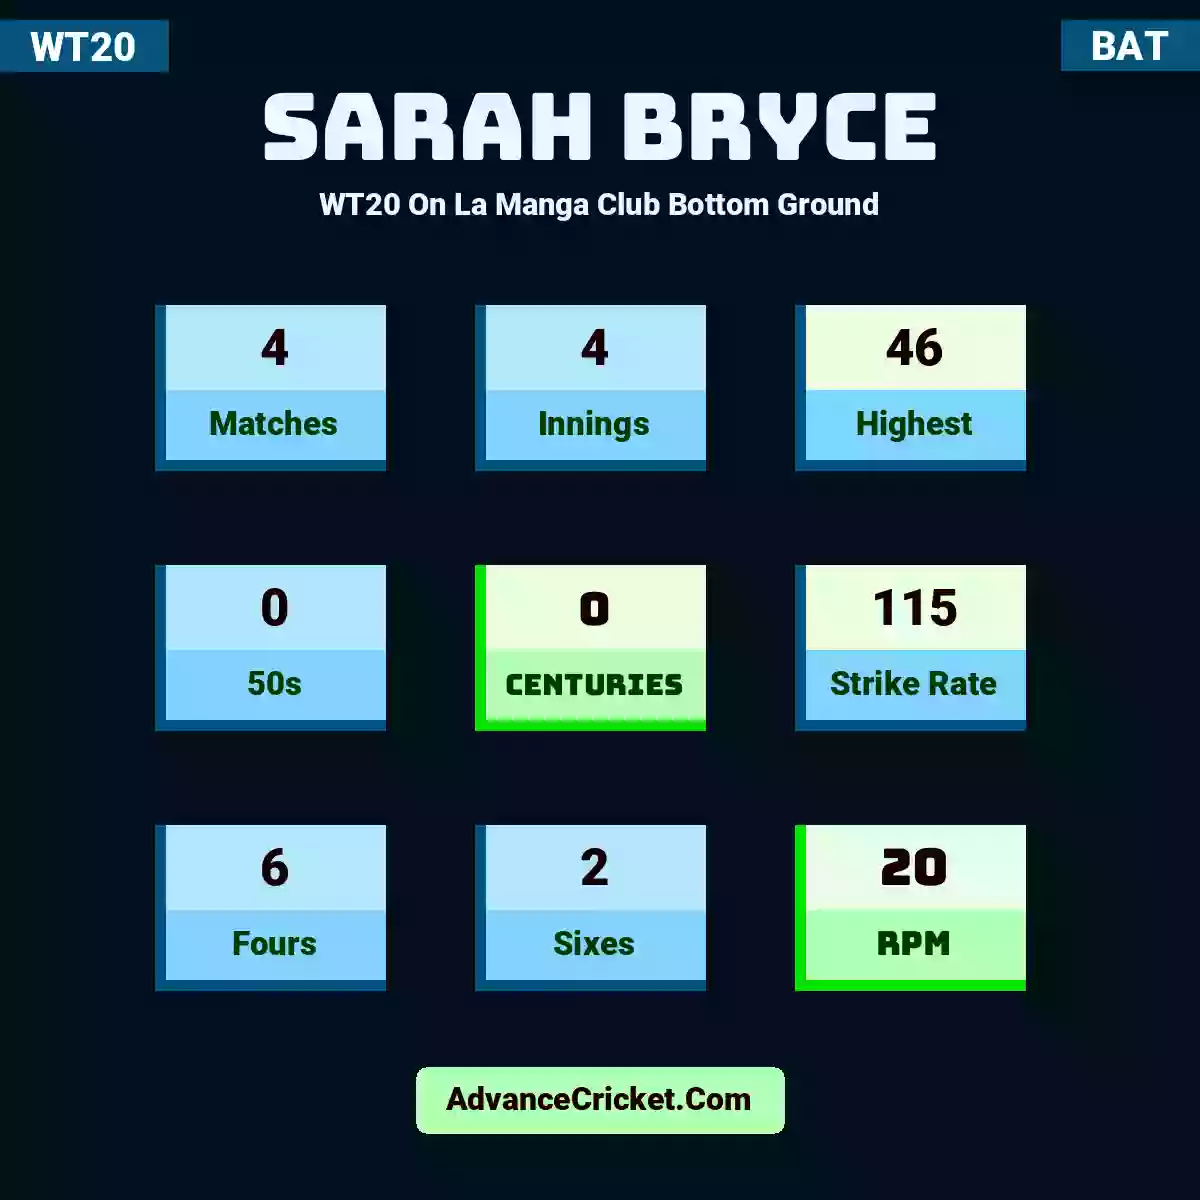 Sarah Bryce WT20  On La Manga Club Bottom Ground, Sarah Bryce played 4 matches, scored 46 runs as highest, 0 half-centuries, and 0 centuries, with a strike rate of 115. S.Bryce hit 6 fours and 2 sixes, with an RPM of 20.